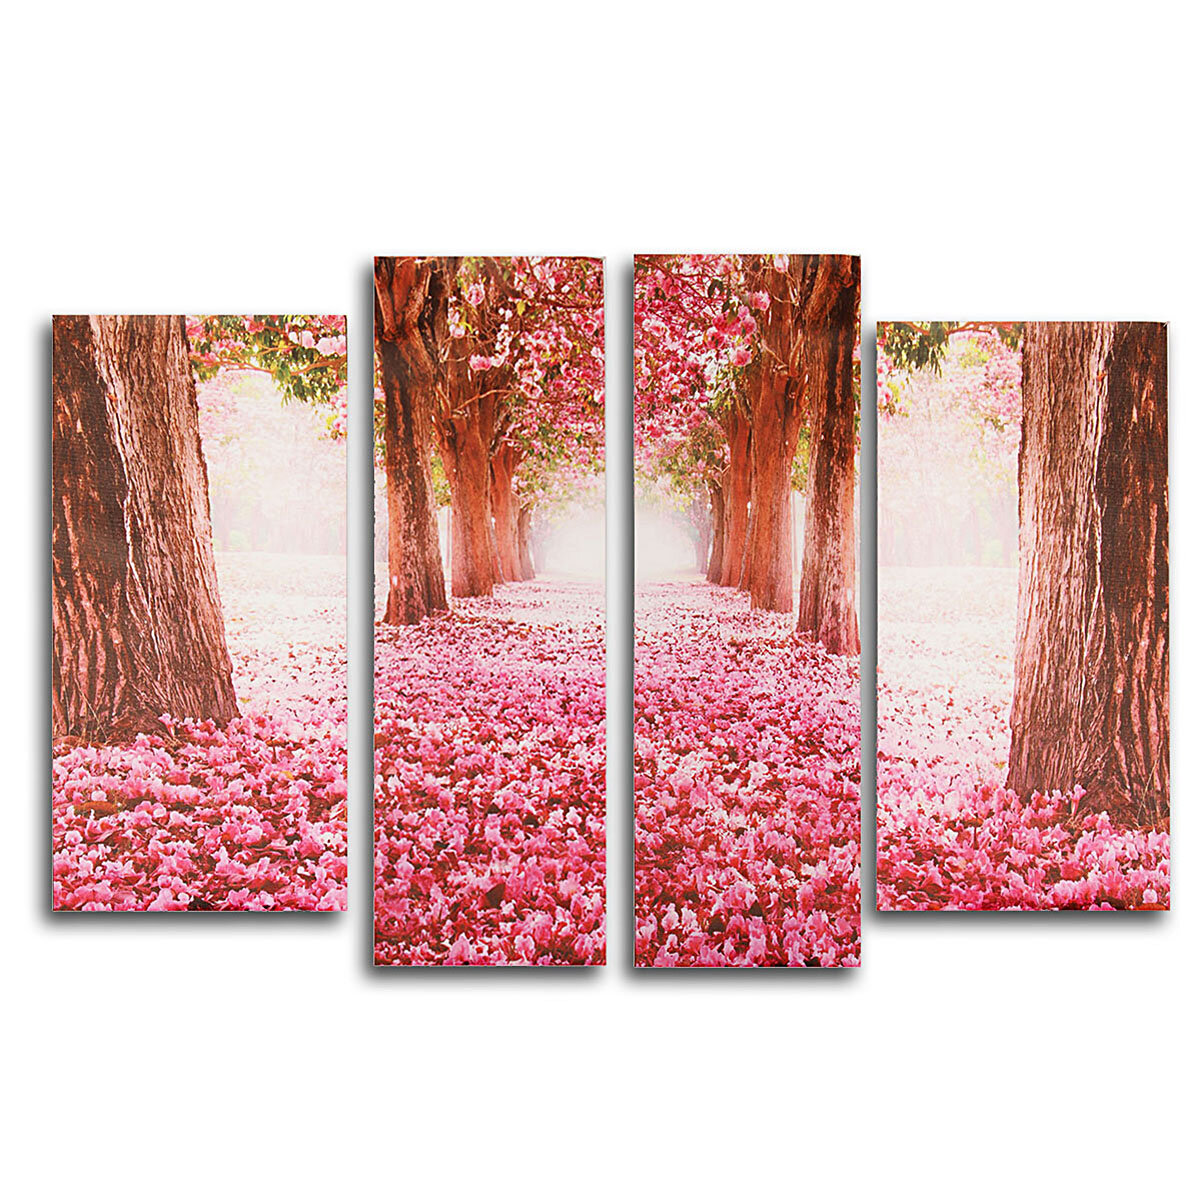 

4Pcs Cherry Blossoms Tree Canvas Print Paintings Wall Decorative Print Art Pictures Frameless Wall Hanging Decorations f